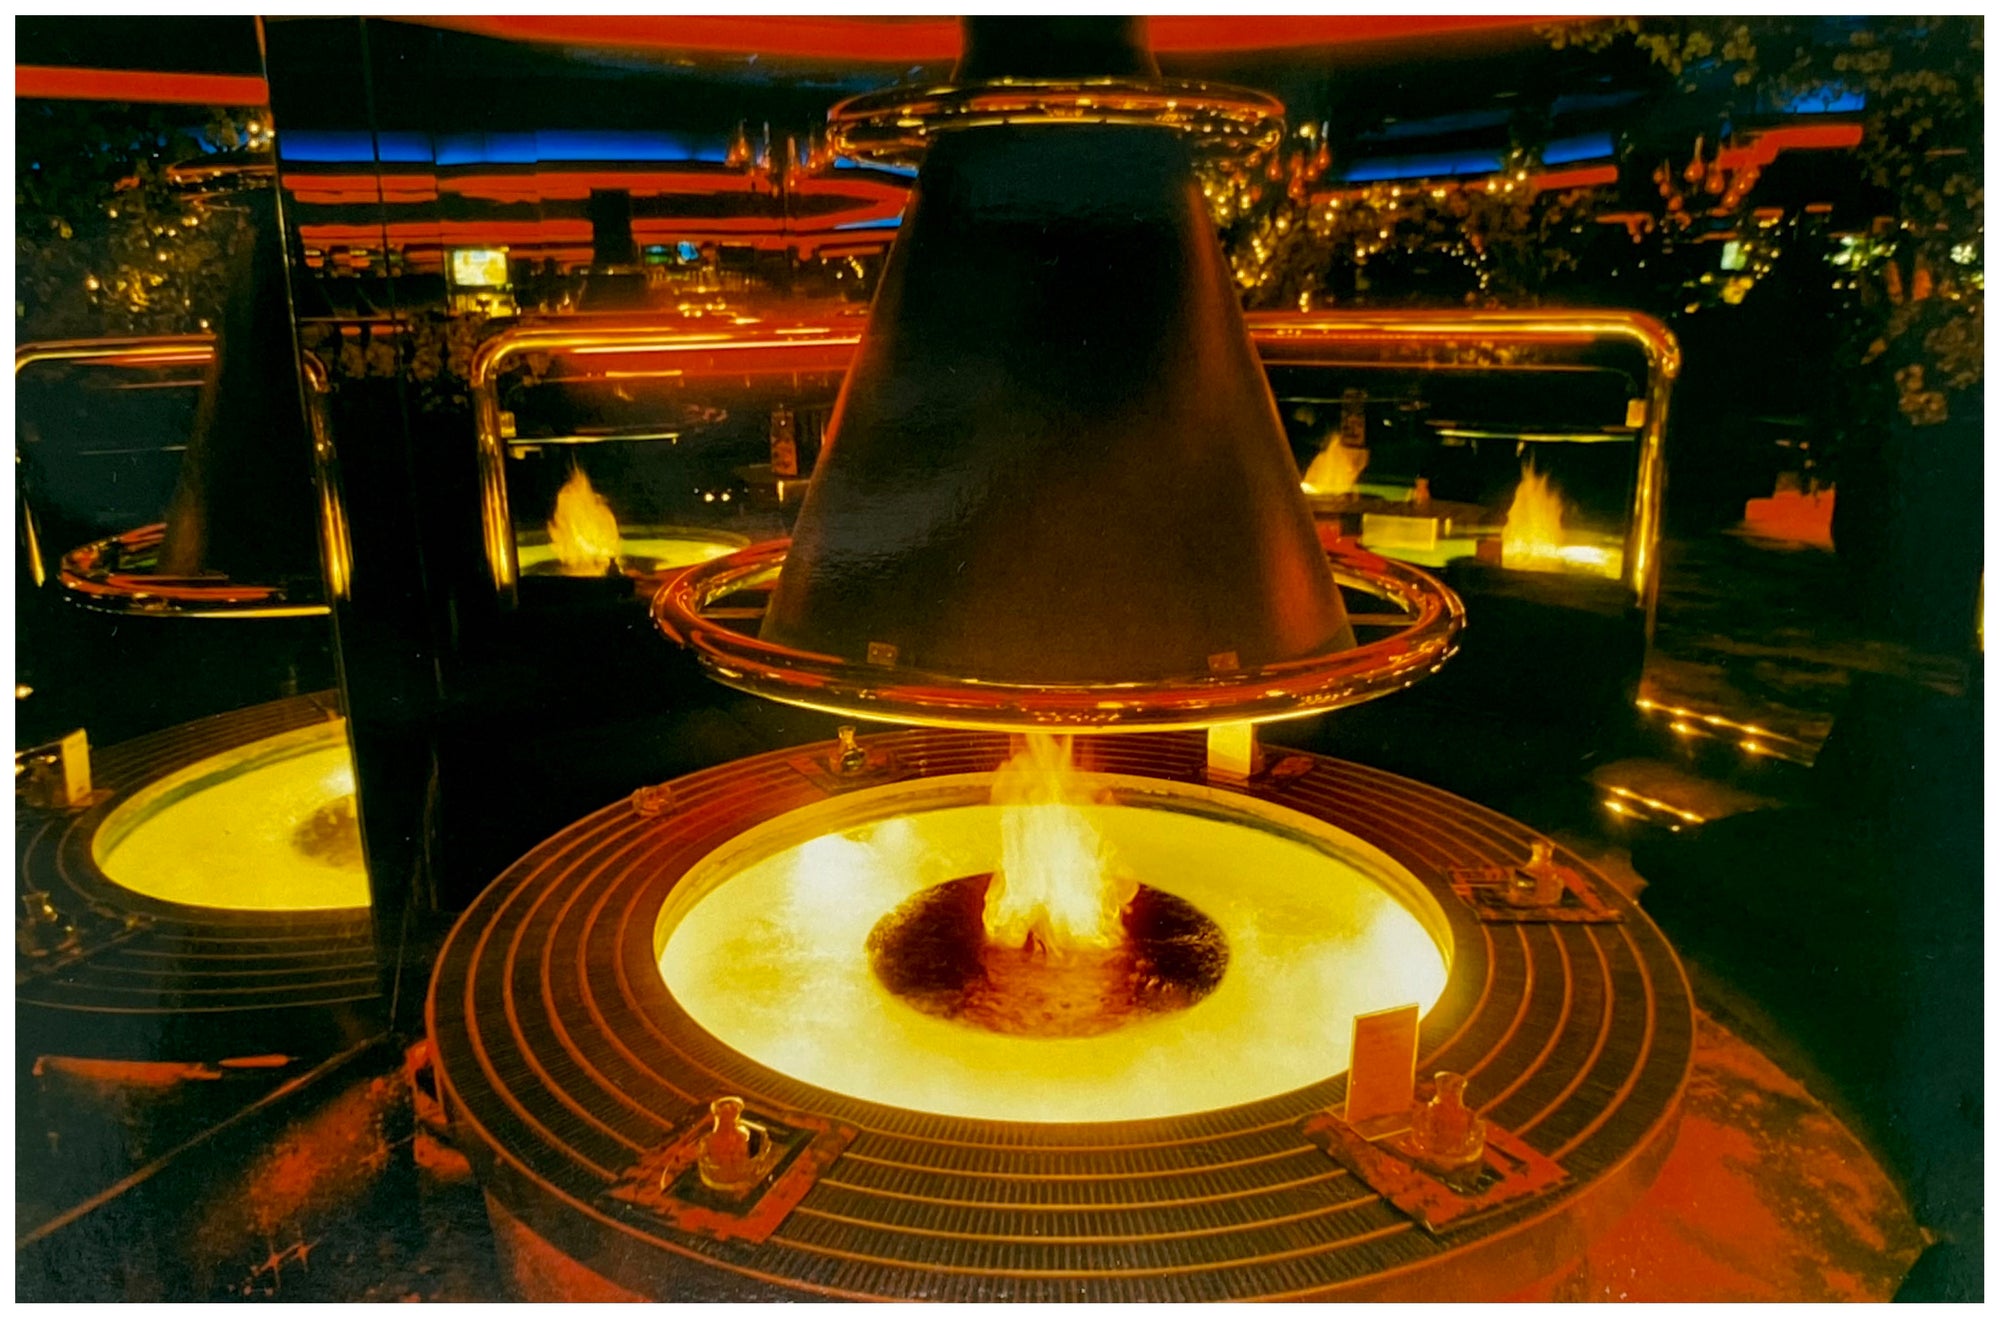 Photograph by Richard Heeps. A fire pit burning inside a lounge bar. There is a conical hood over the fire and the fire is reflected in the metal and mirrors in the lounge.